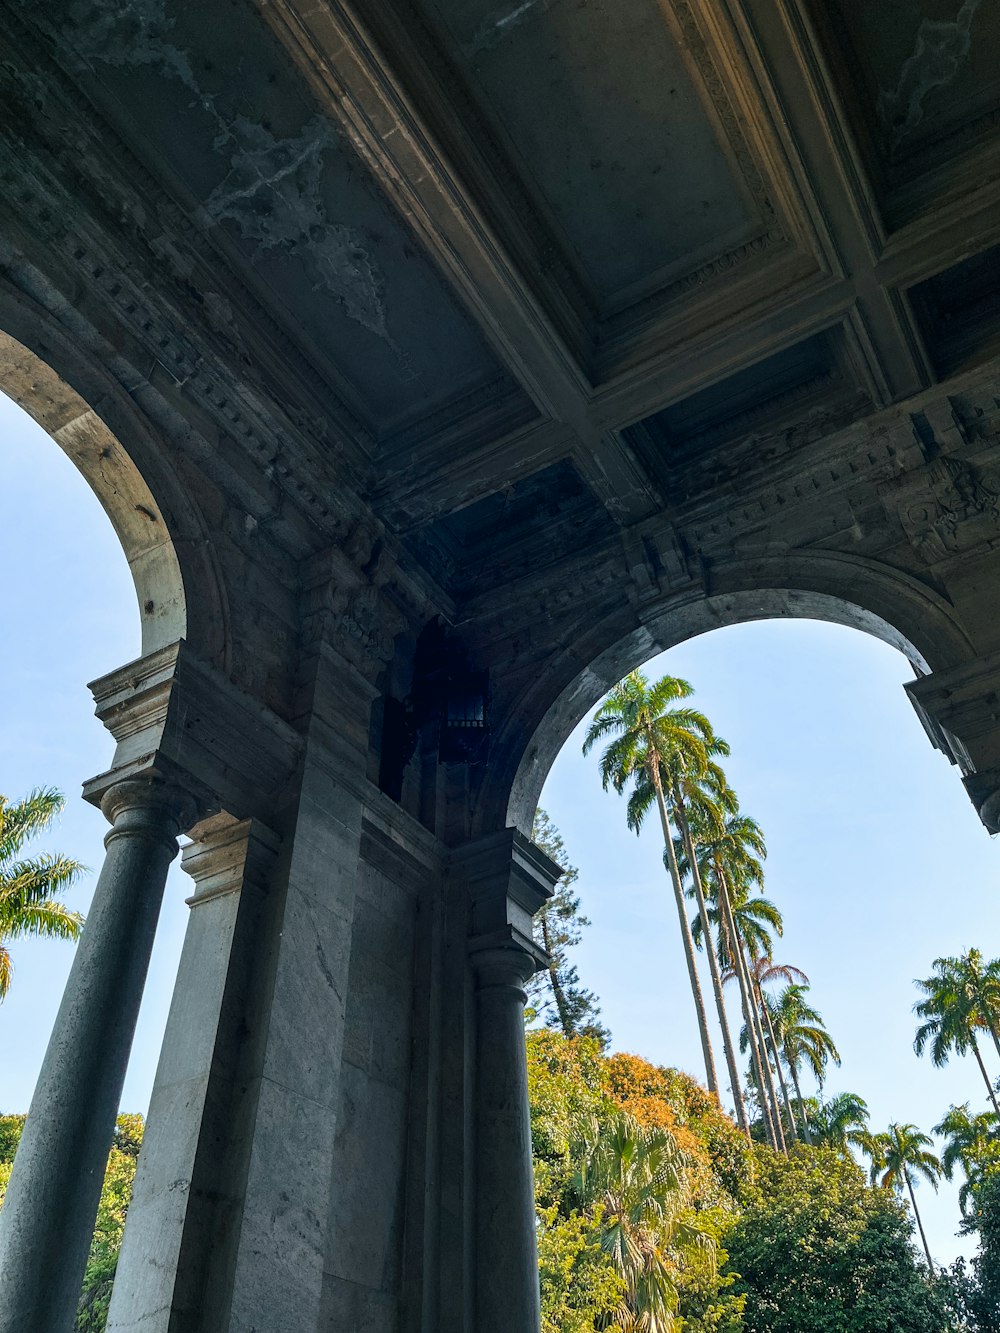 an old building with columns and palm trees in the background